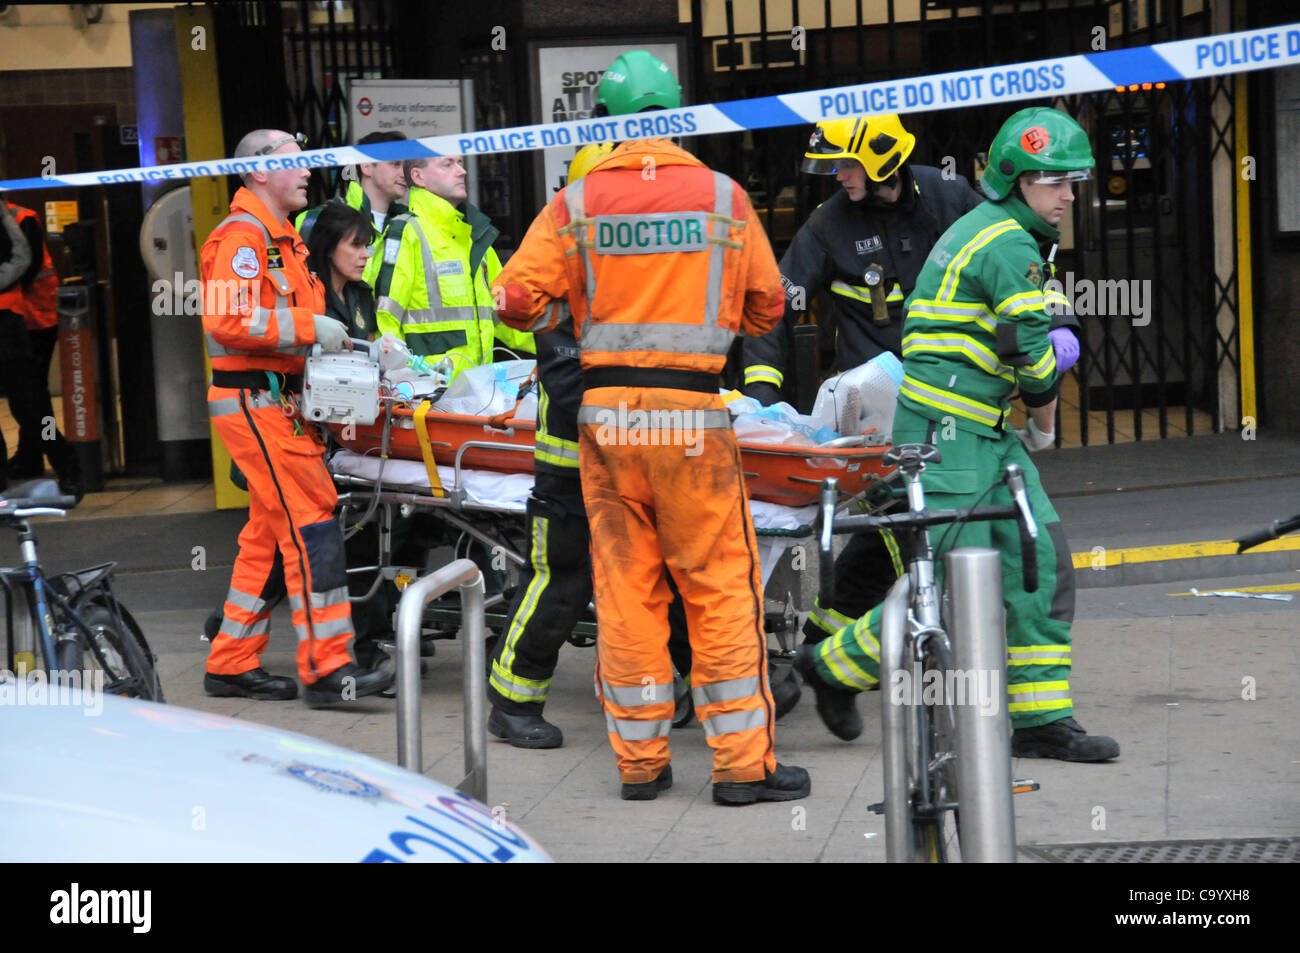 Wood Green London 10/3/12 Person under a train at Wood Green Underground station, paramedics, ambulance staff and police attend the scene as the station is closed to recover the person alive. The injured person is taken from Wood Green station to the ambulance. Stock Photo